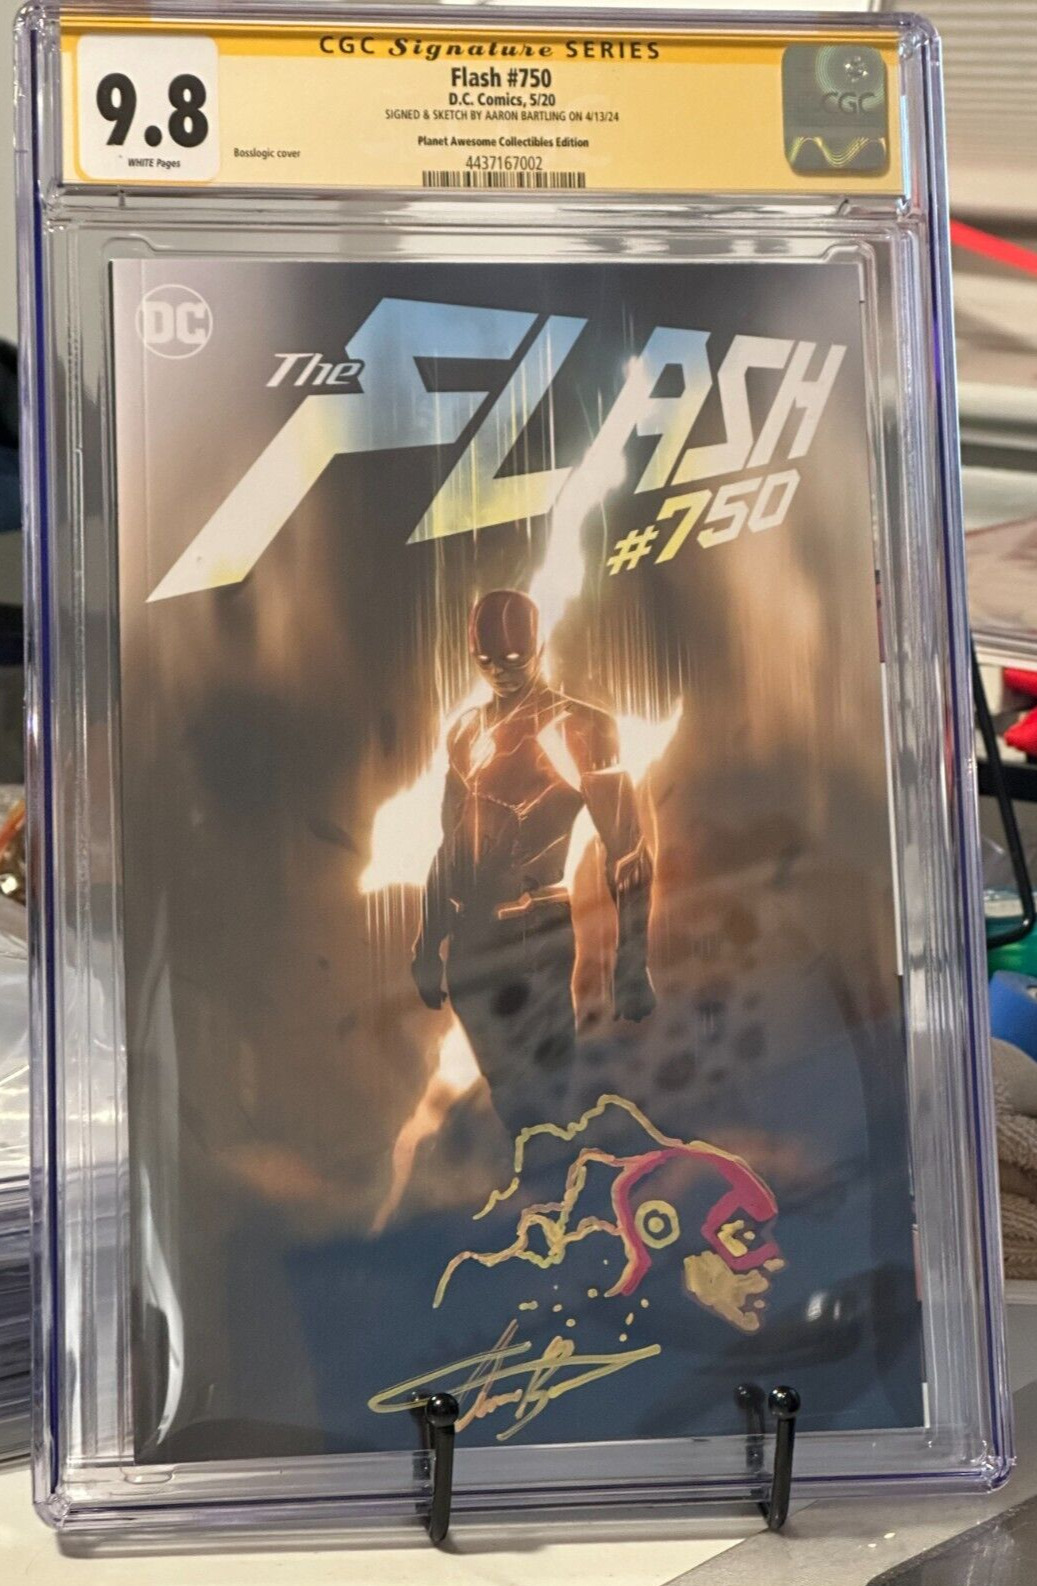 CGC 9.8 The Flash #750 Bosslogic Anniversary Signed & Remarked by Aaron Bartling